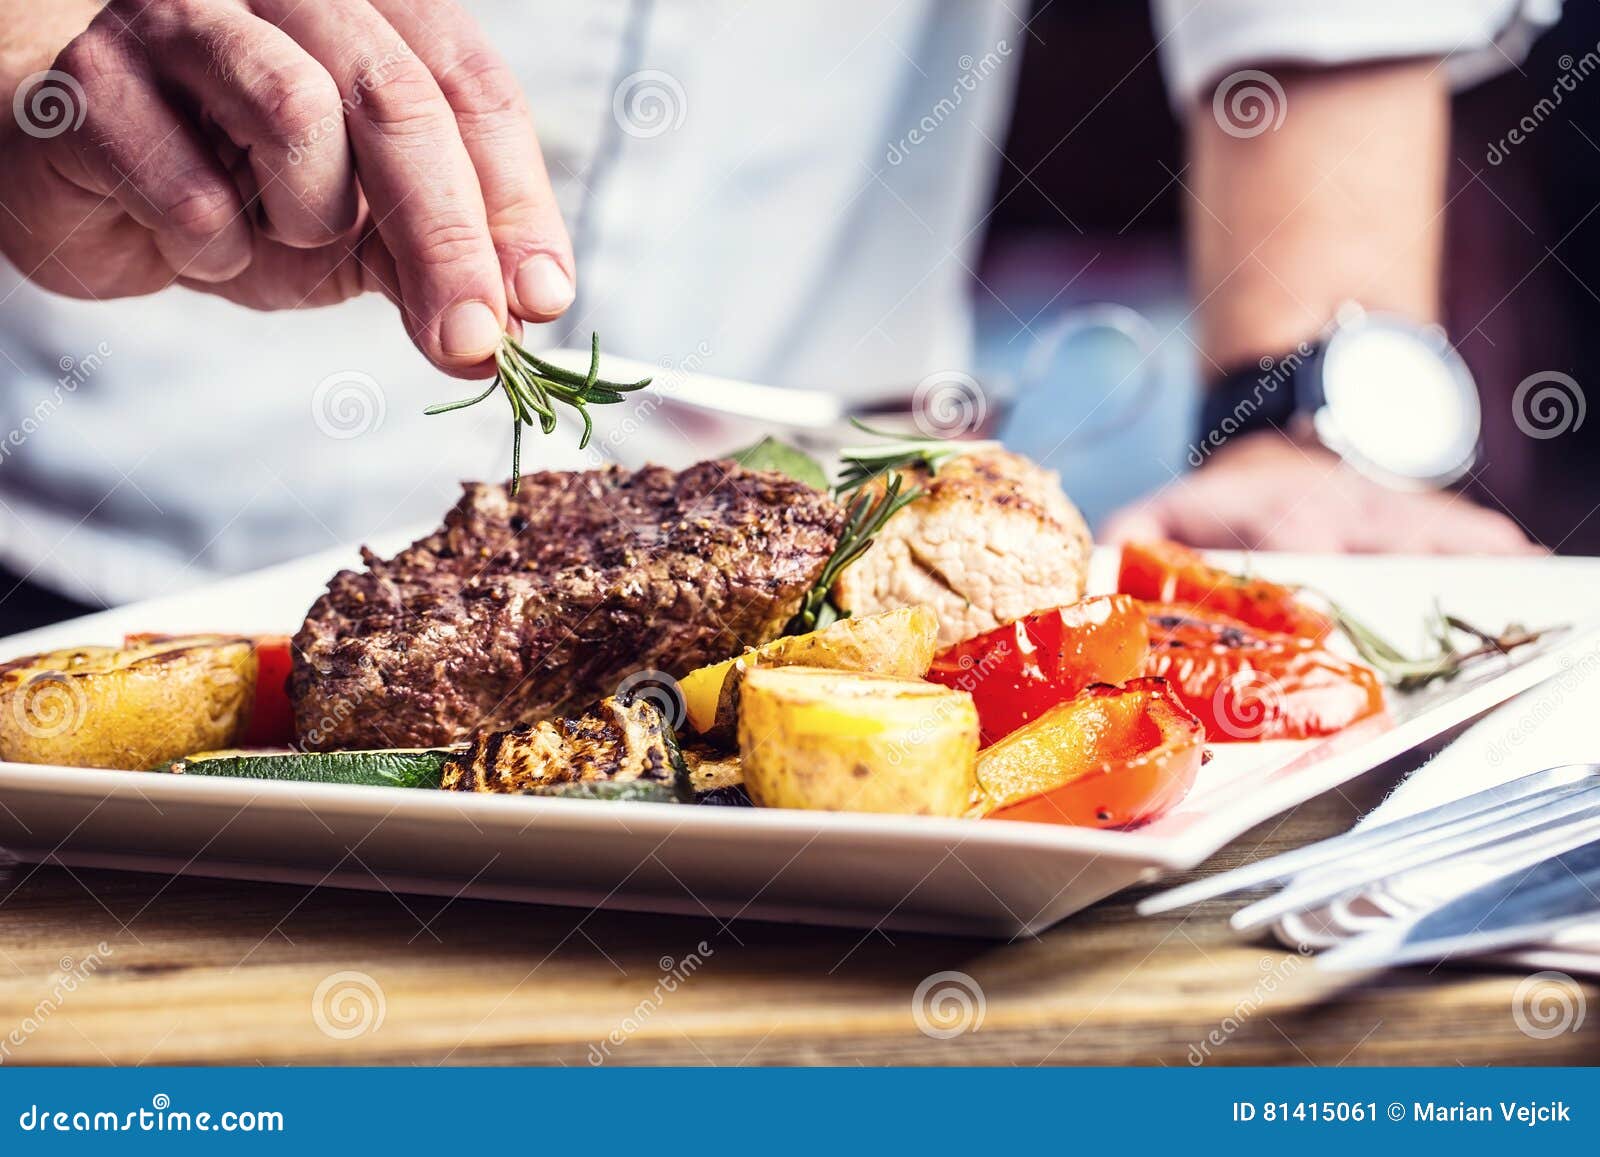 chef in hotel or restaurant kitchen cooking only hands. prepared beef steak with vegetable decoration